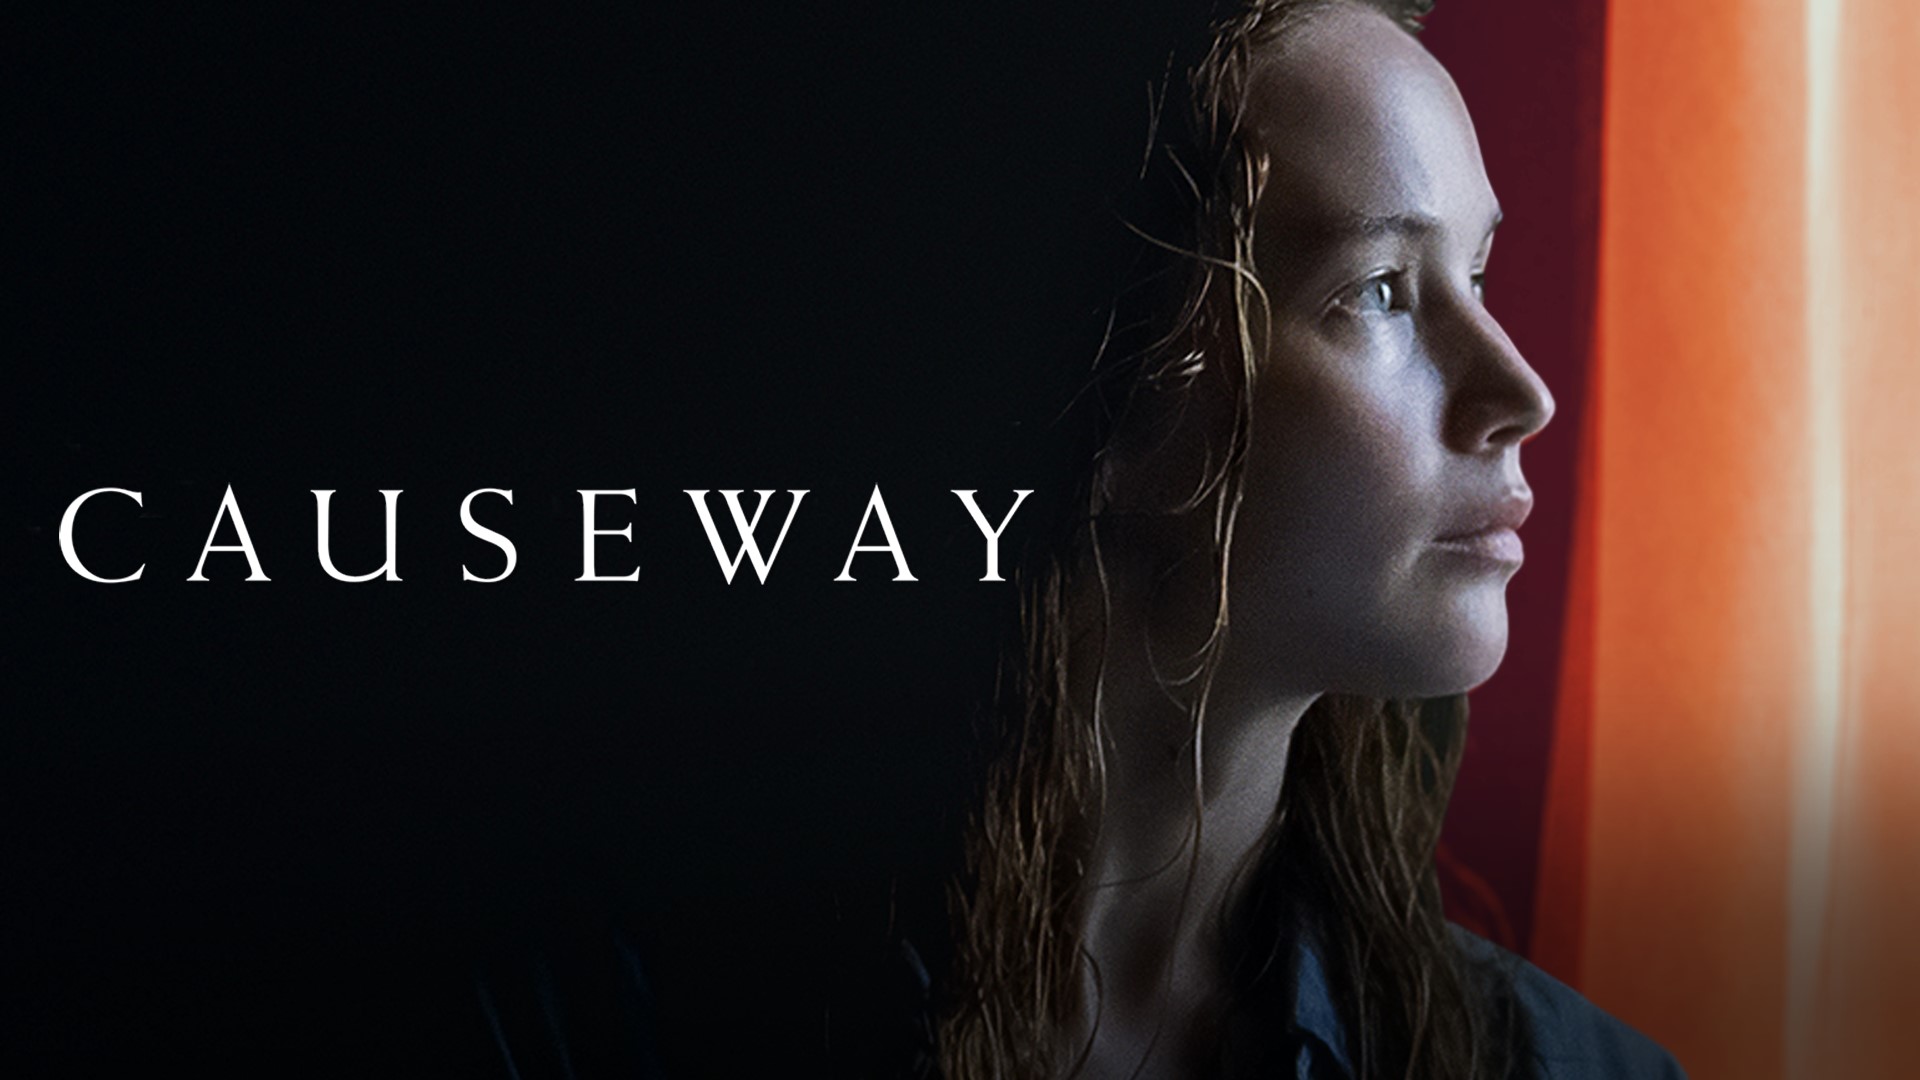 Jennifer Lawrence makes her return to acting with a quiet, contemplative look at trauma in Causeway. Brian Tyree Henry also makes his case for an Oscar nom.